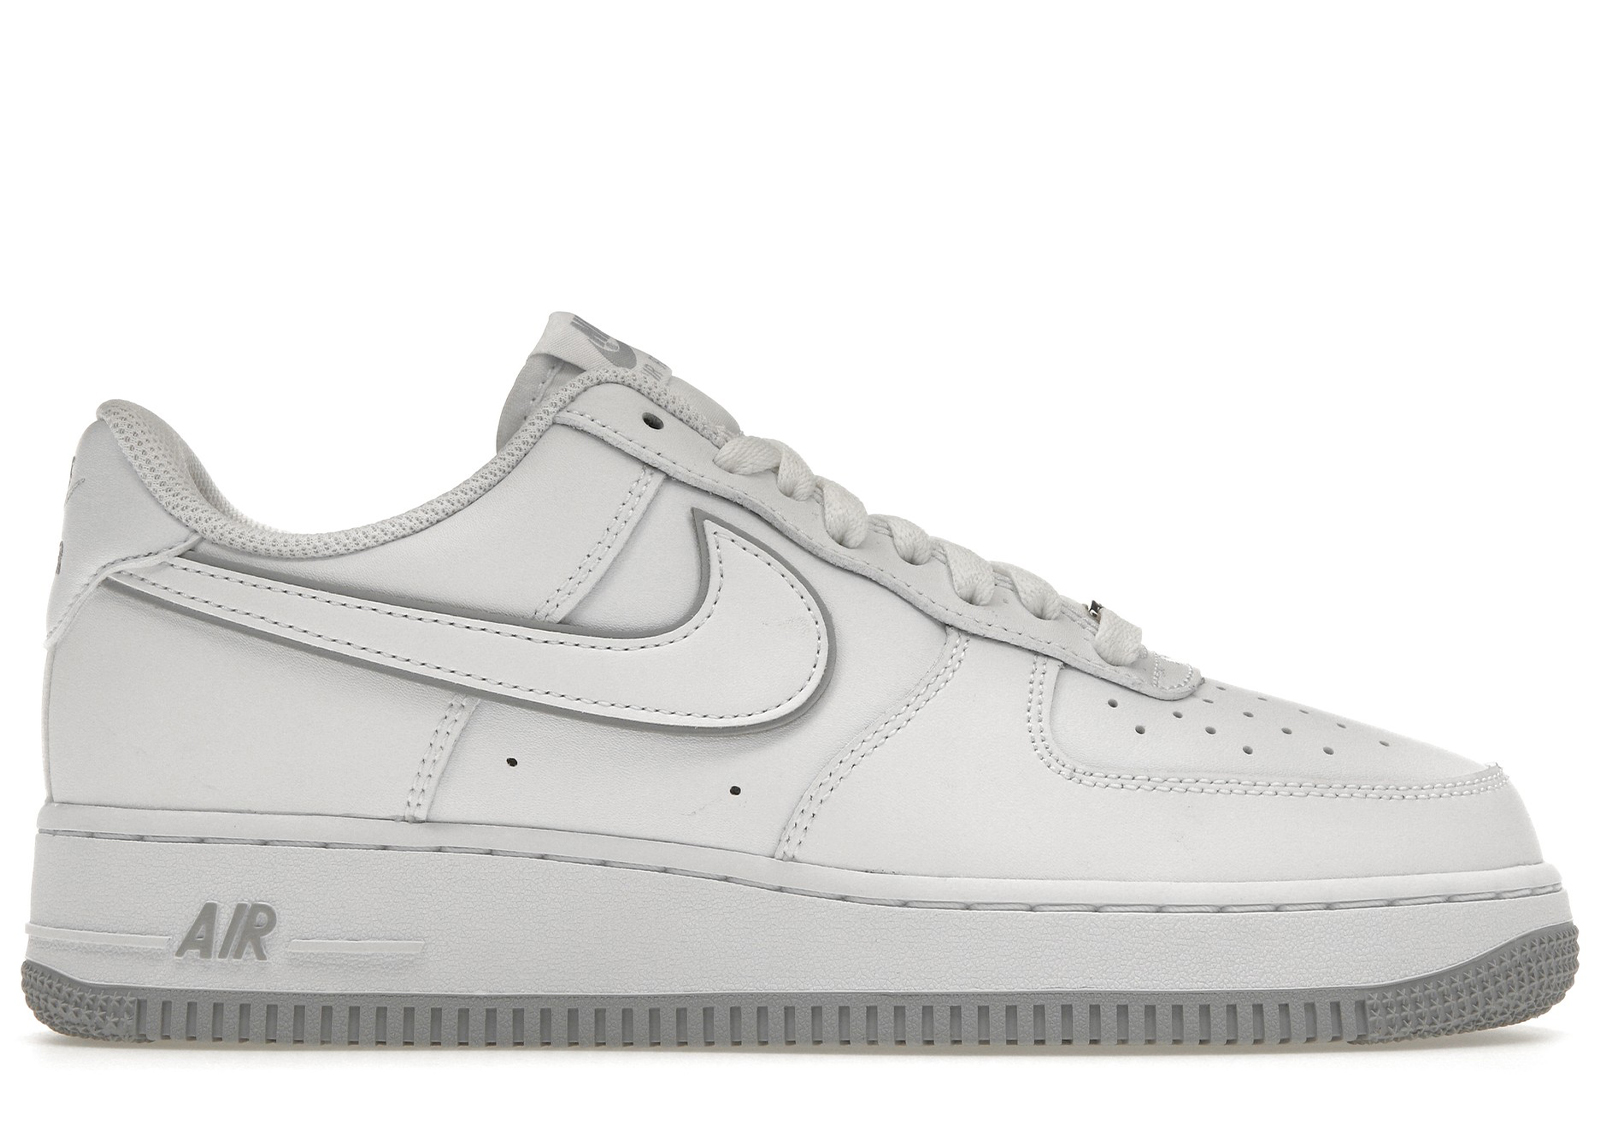 supremeNike Air Force 1 Low '07 White/Wolf grey